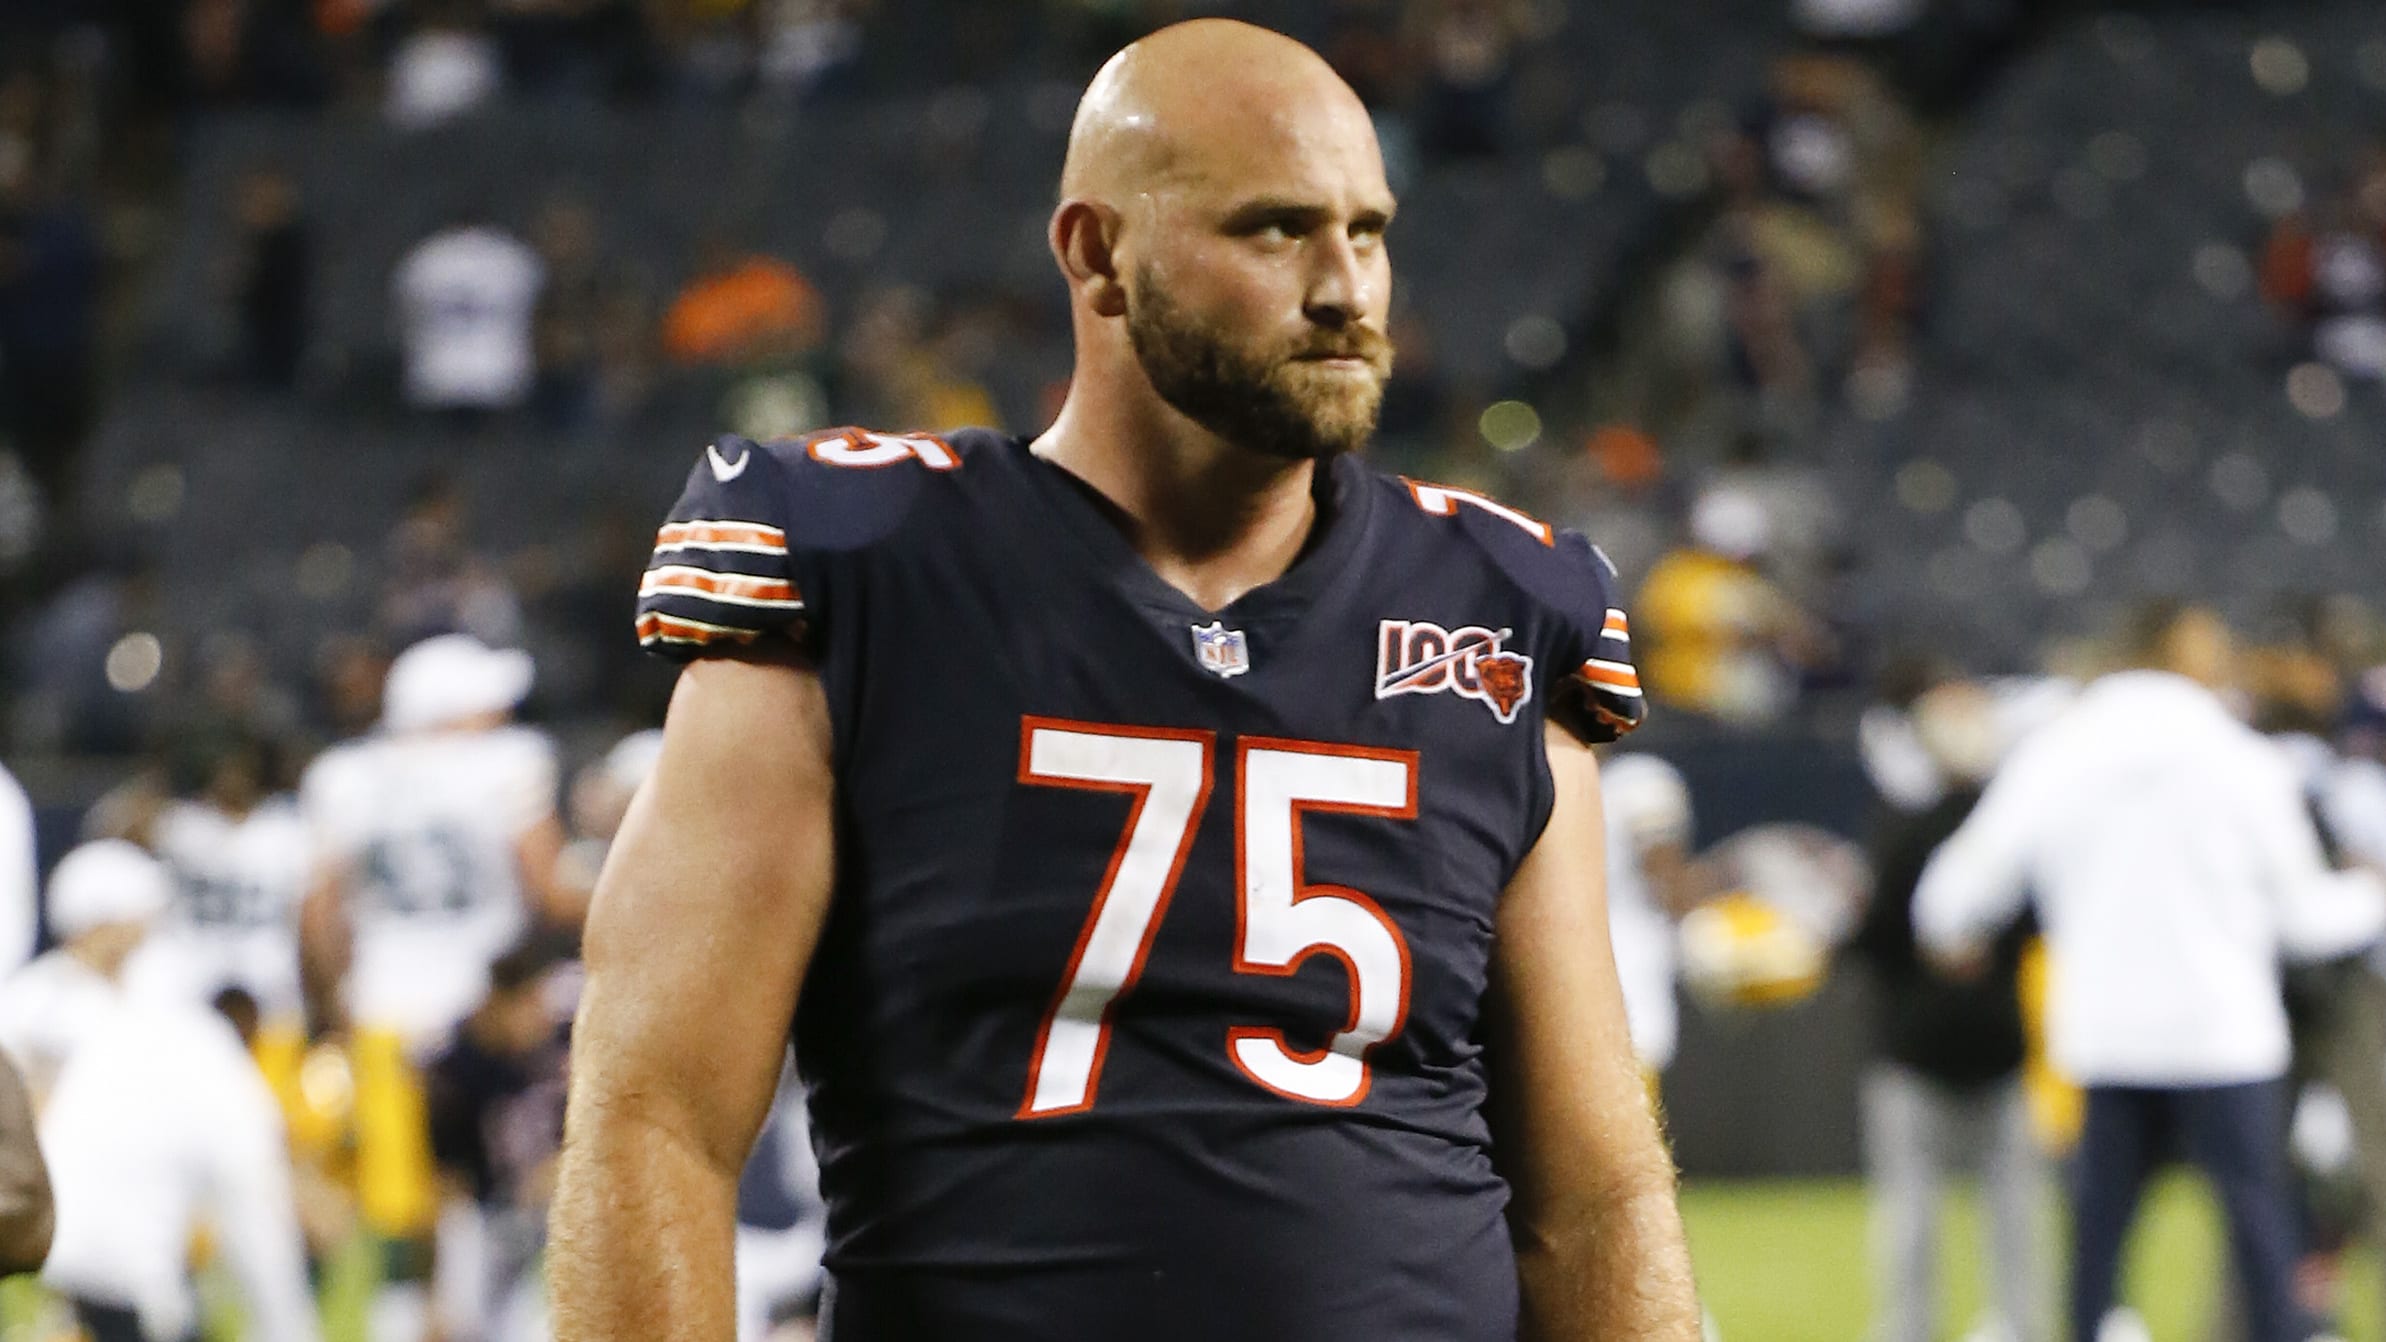 Kyle Long's Huge Weight Loss in Retirement is Pretty Impressive